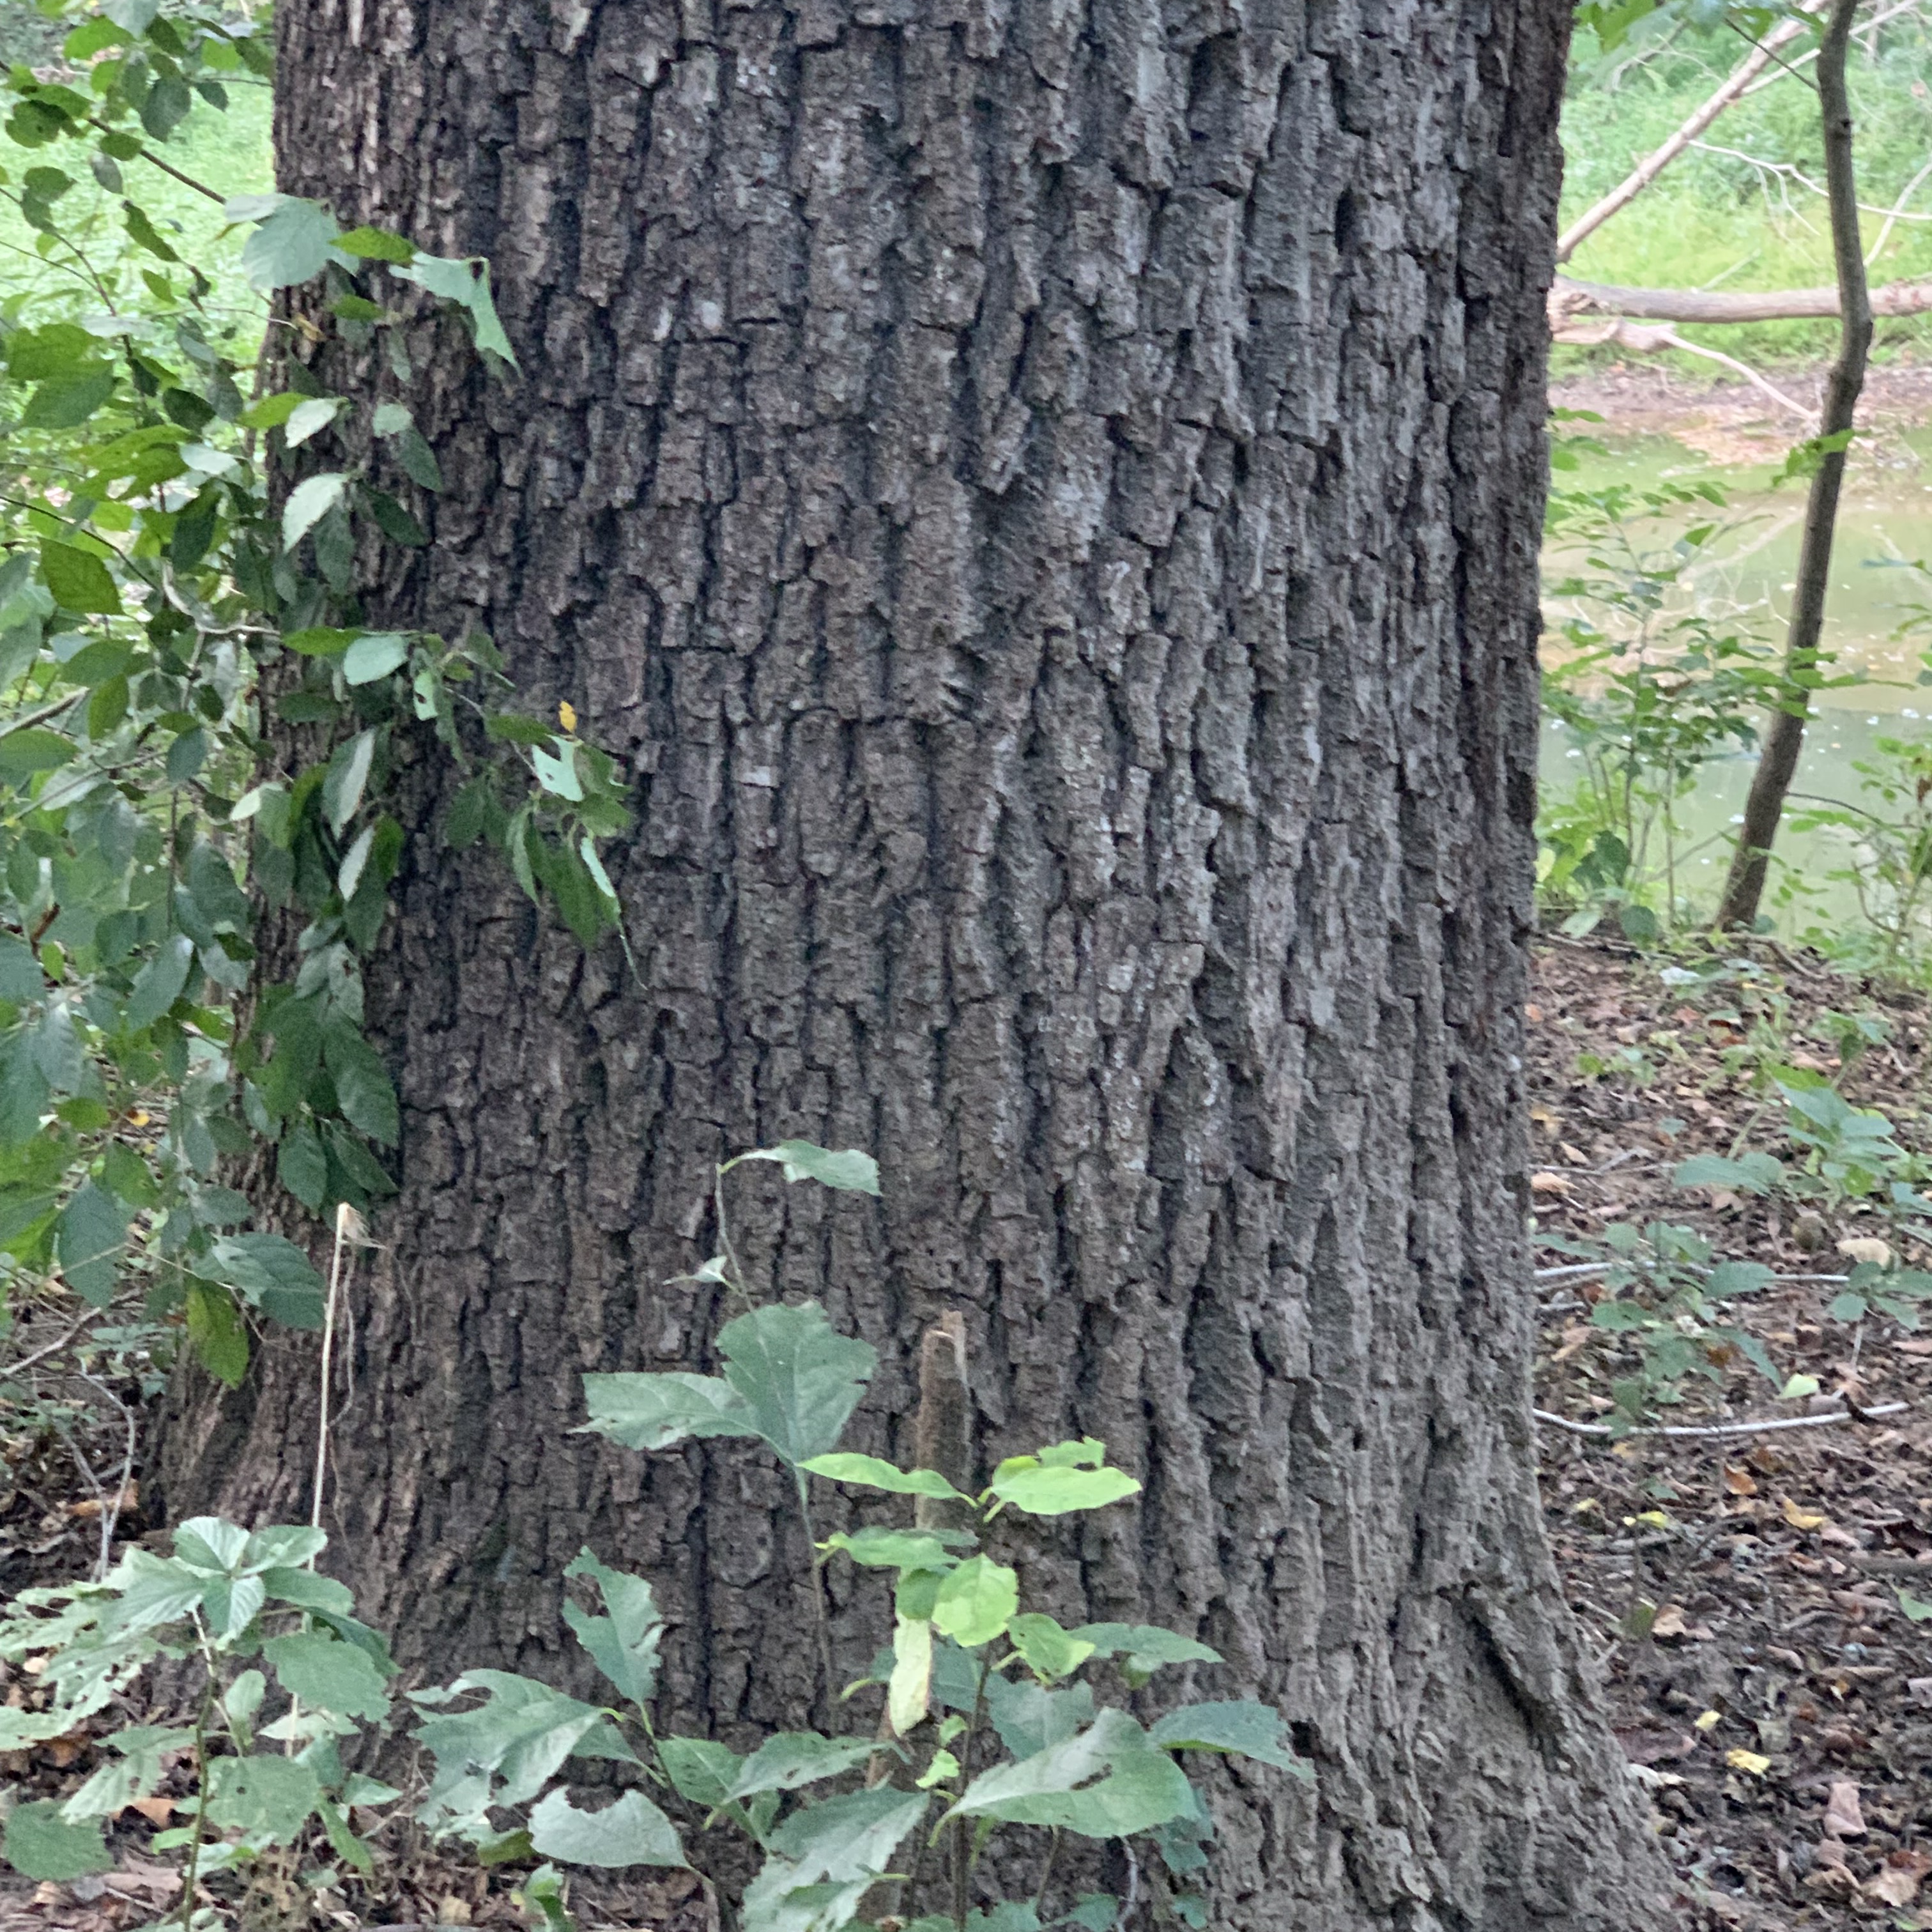 Large trunk showing characteristic dark brown bark.